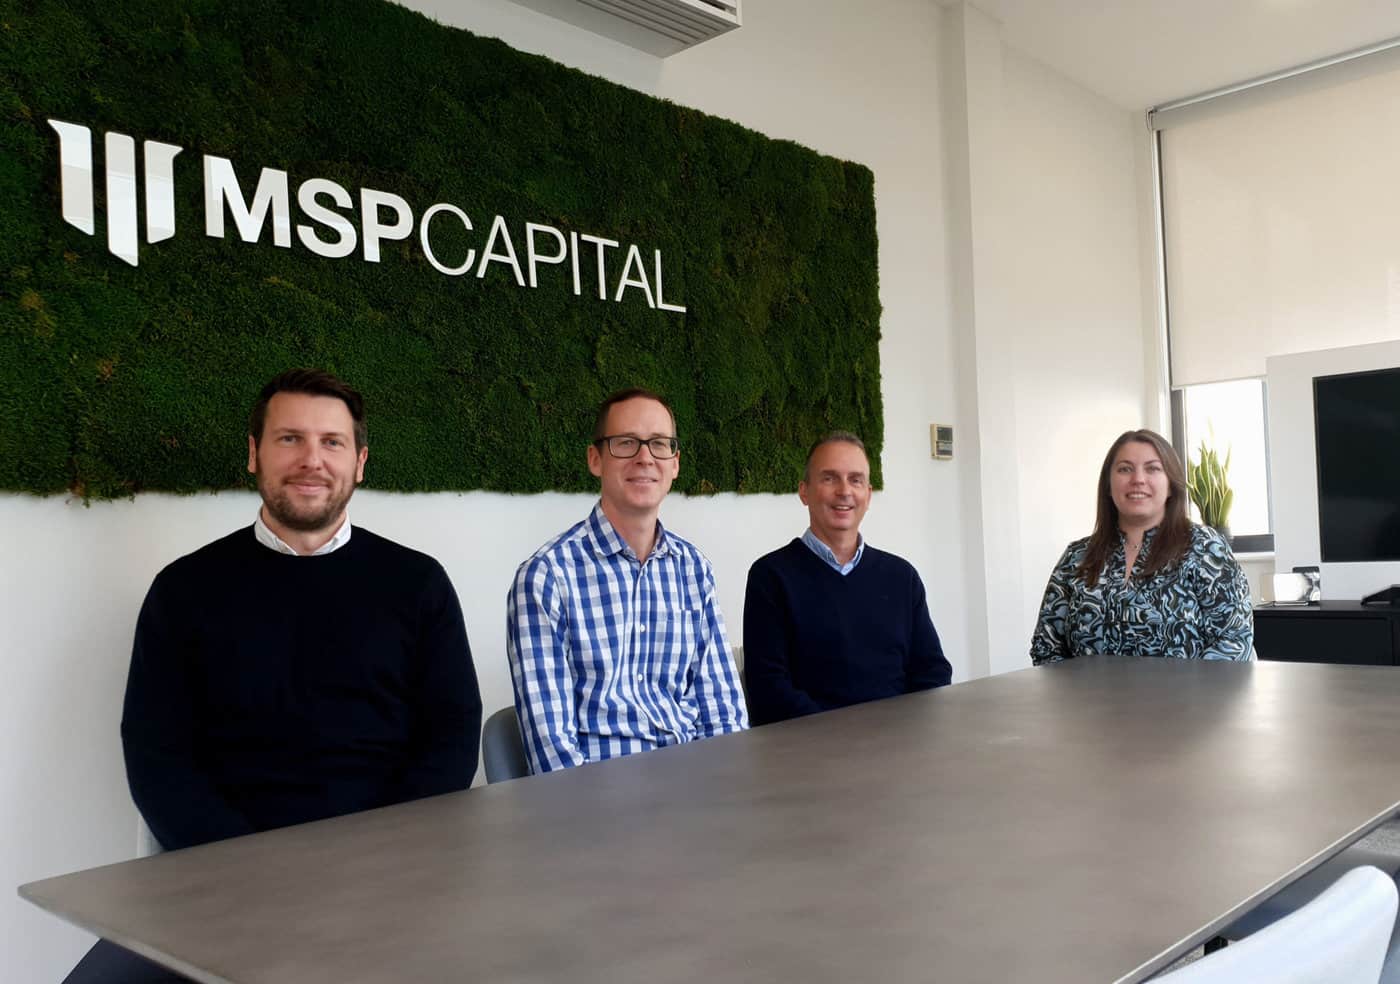 Poole’s MSP Capital makes 4 promotions